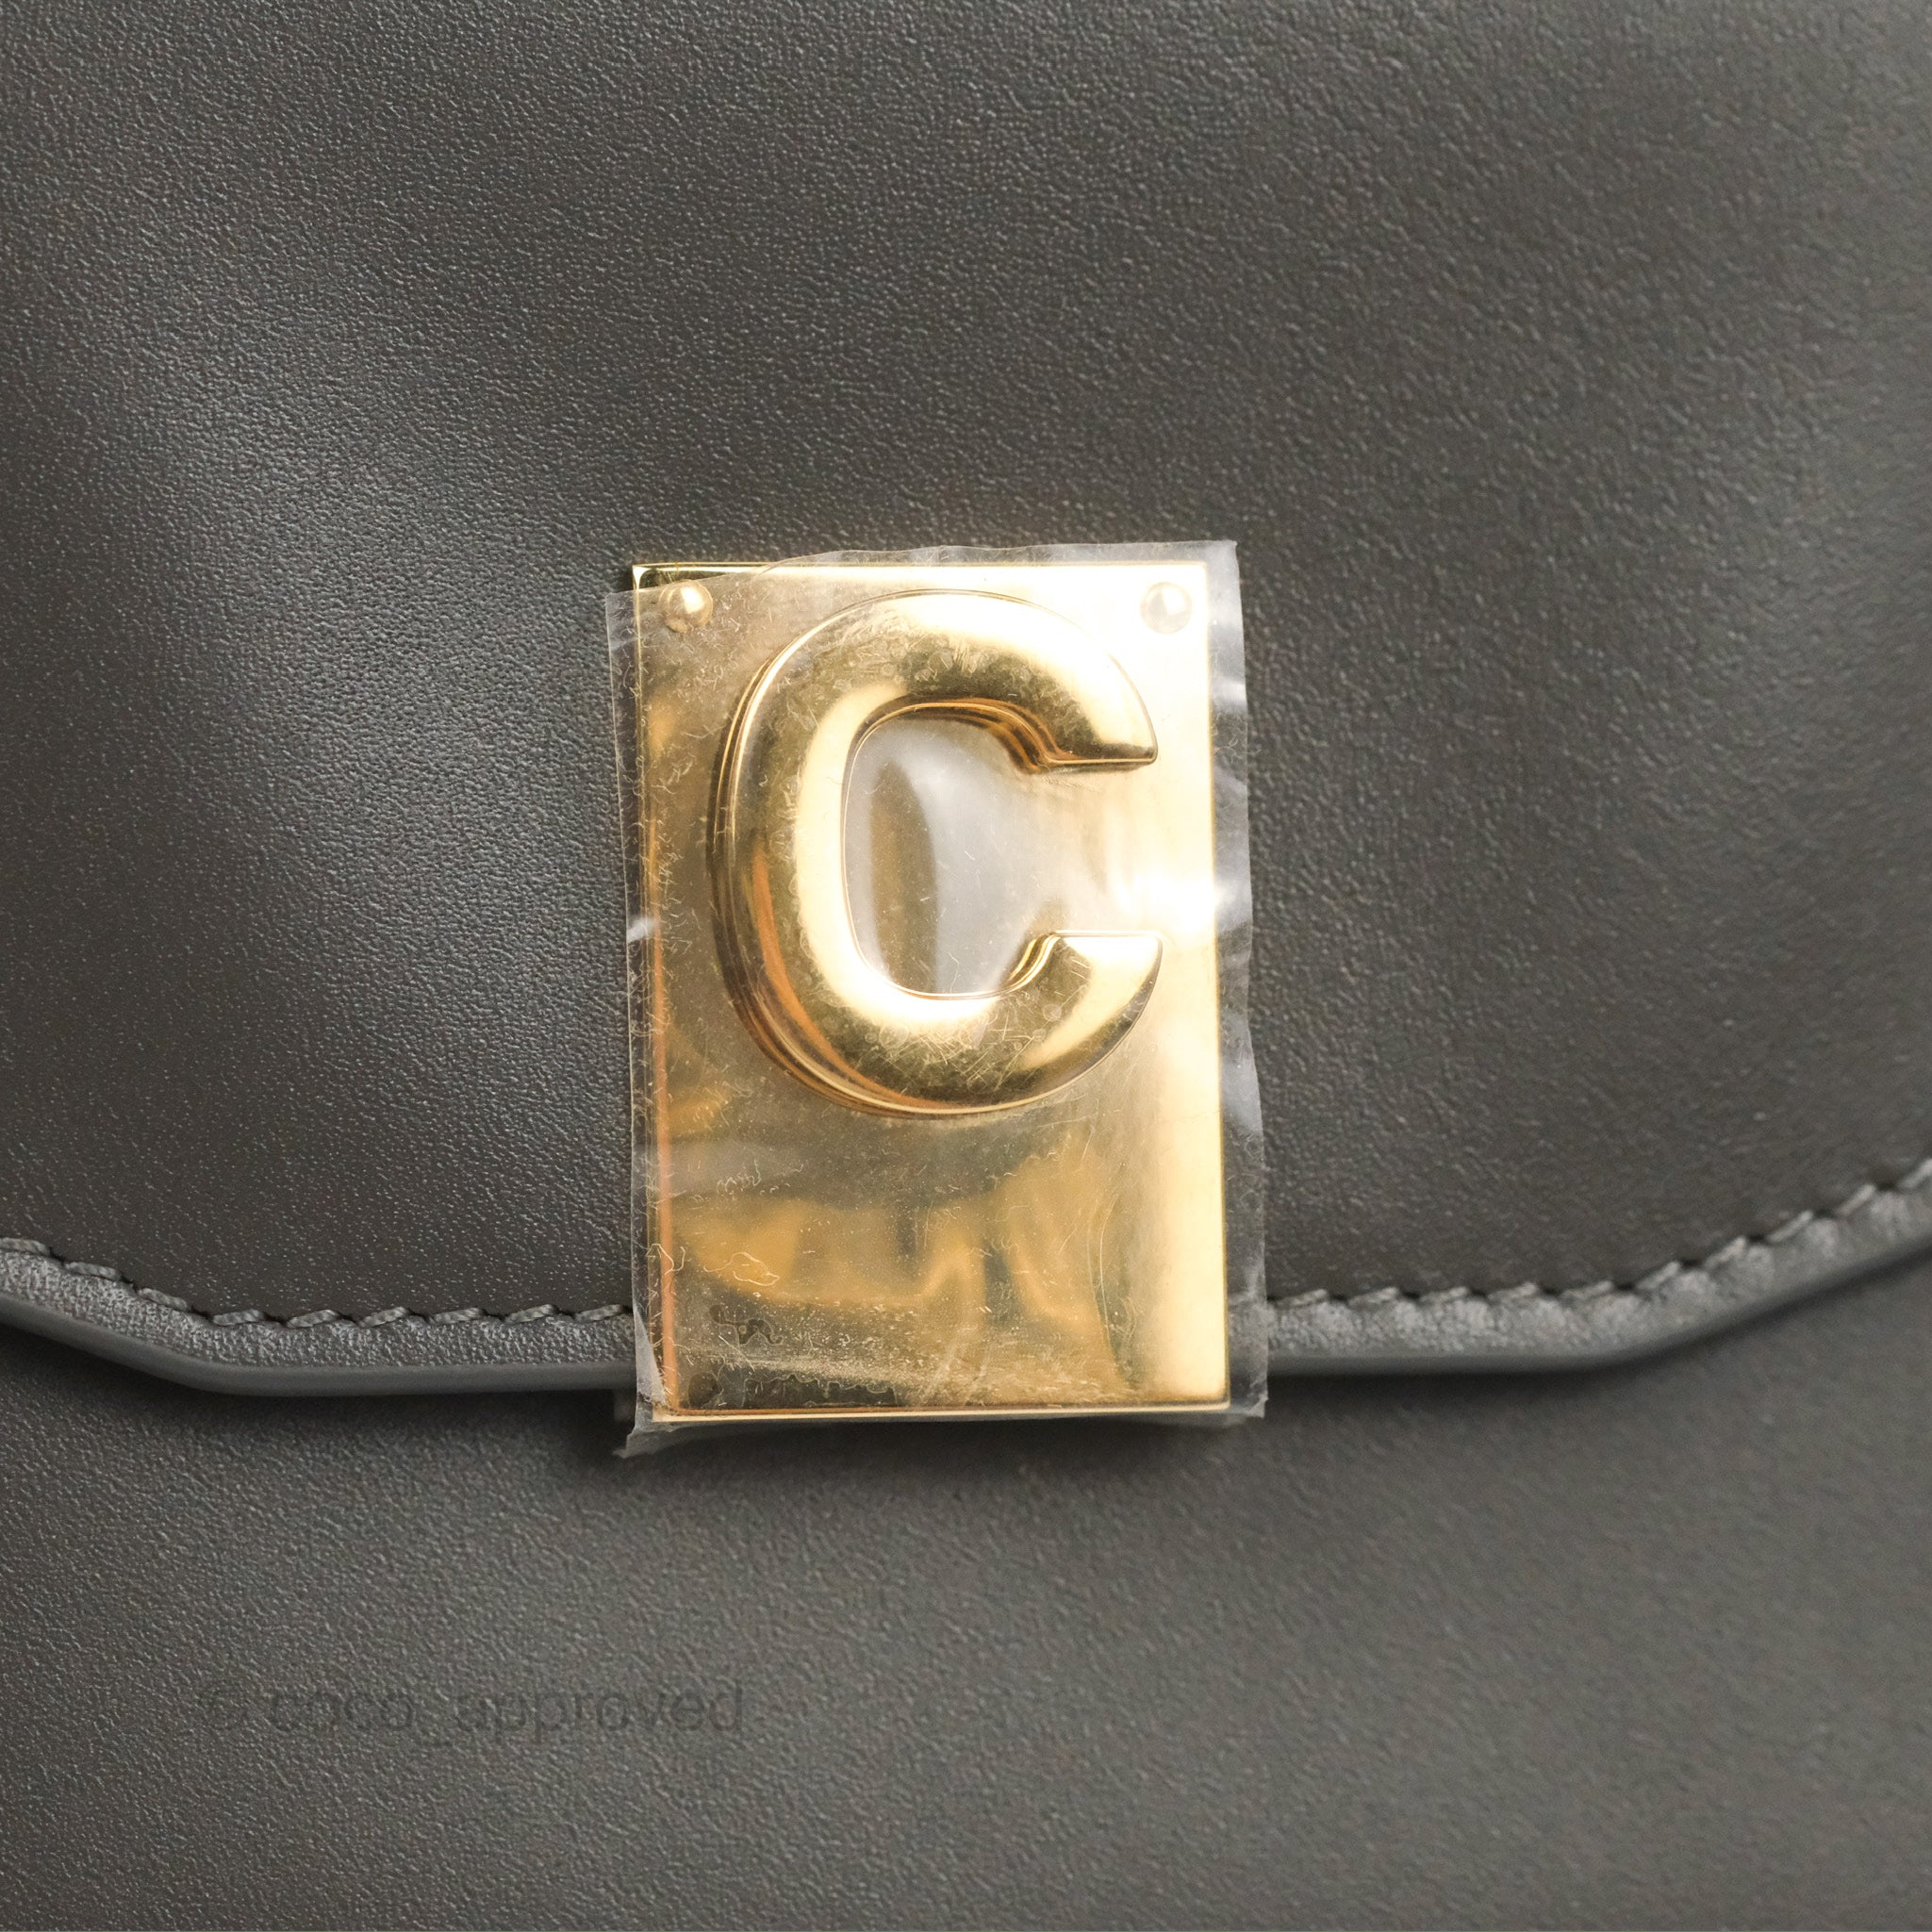 Celine C Wallet On Chain WOC Grey Smooth Calfskin – Coco Approved